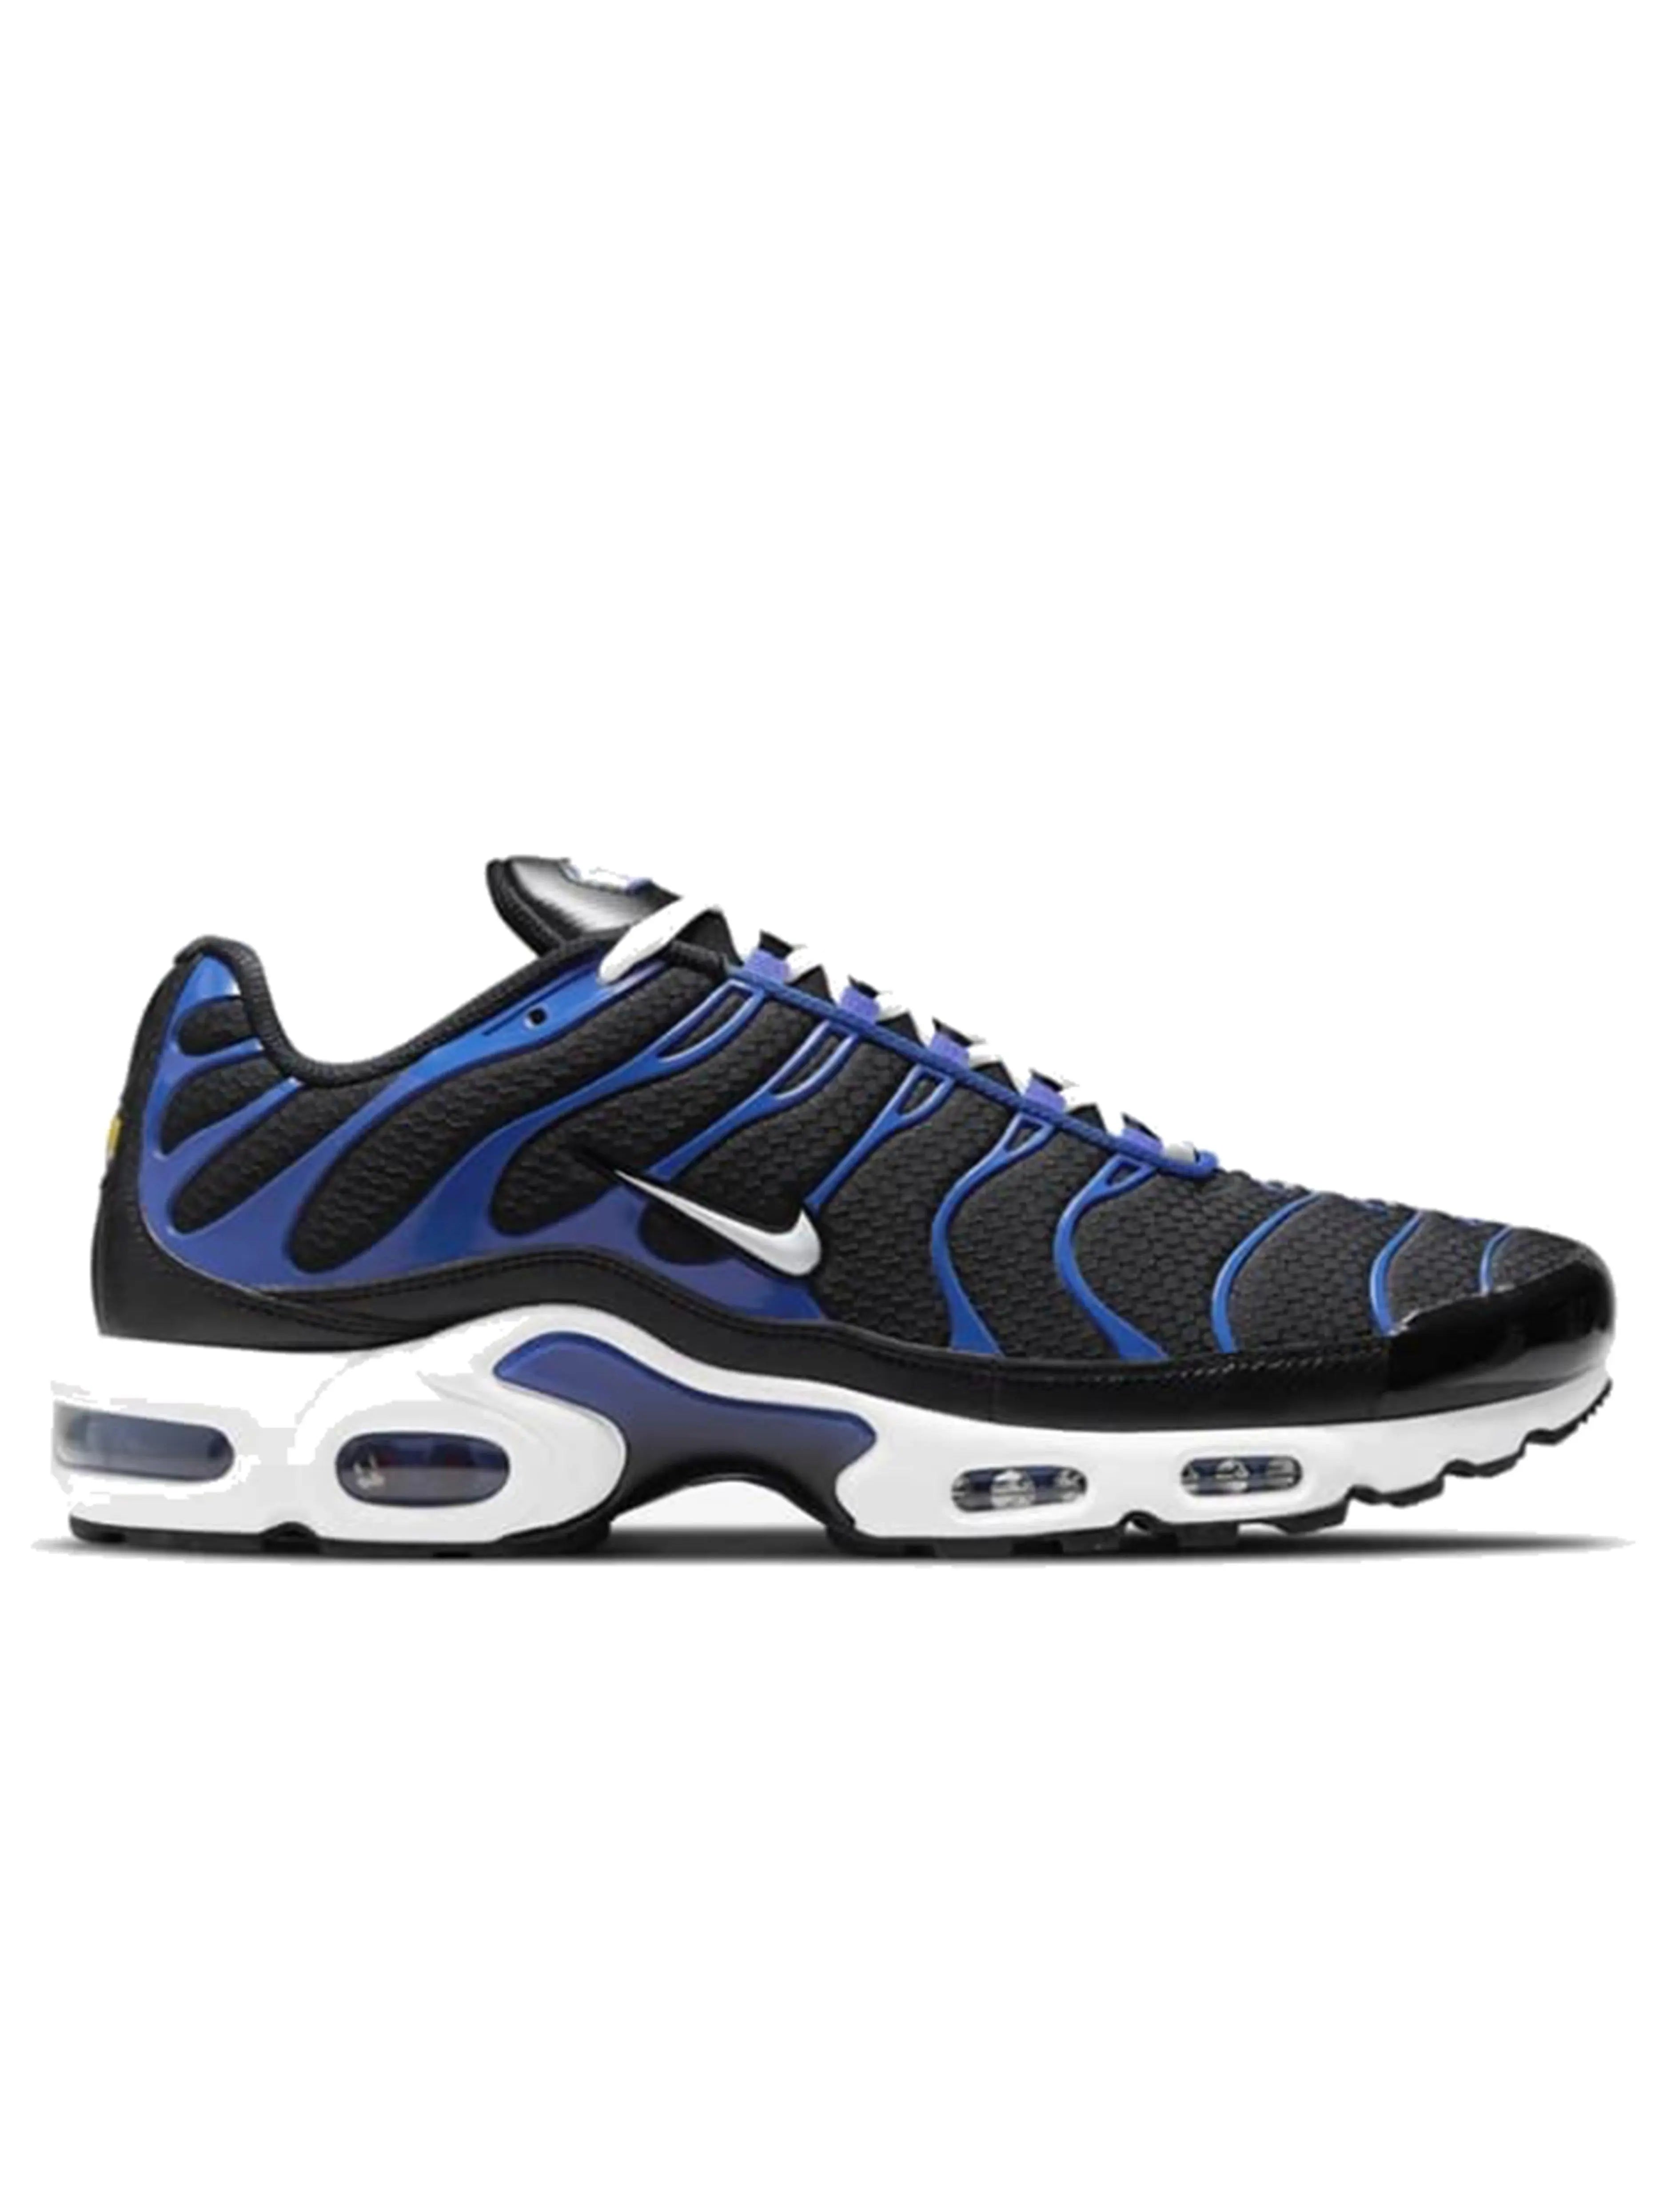 Nike Air Max Plus TN Black Royal Blue in Auckland, New Zealand - Prior